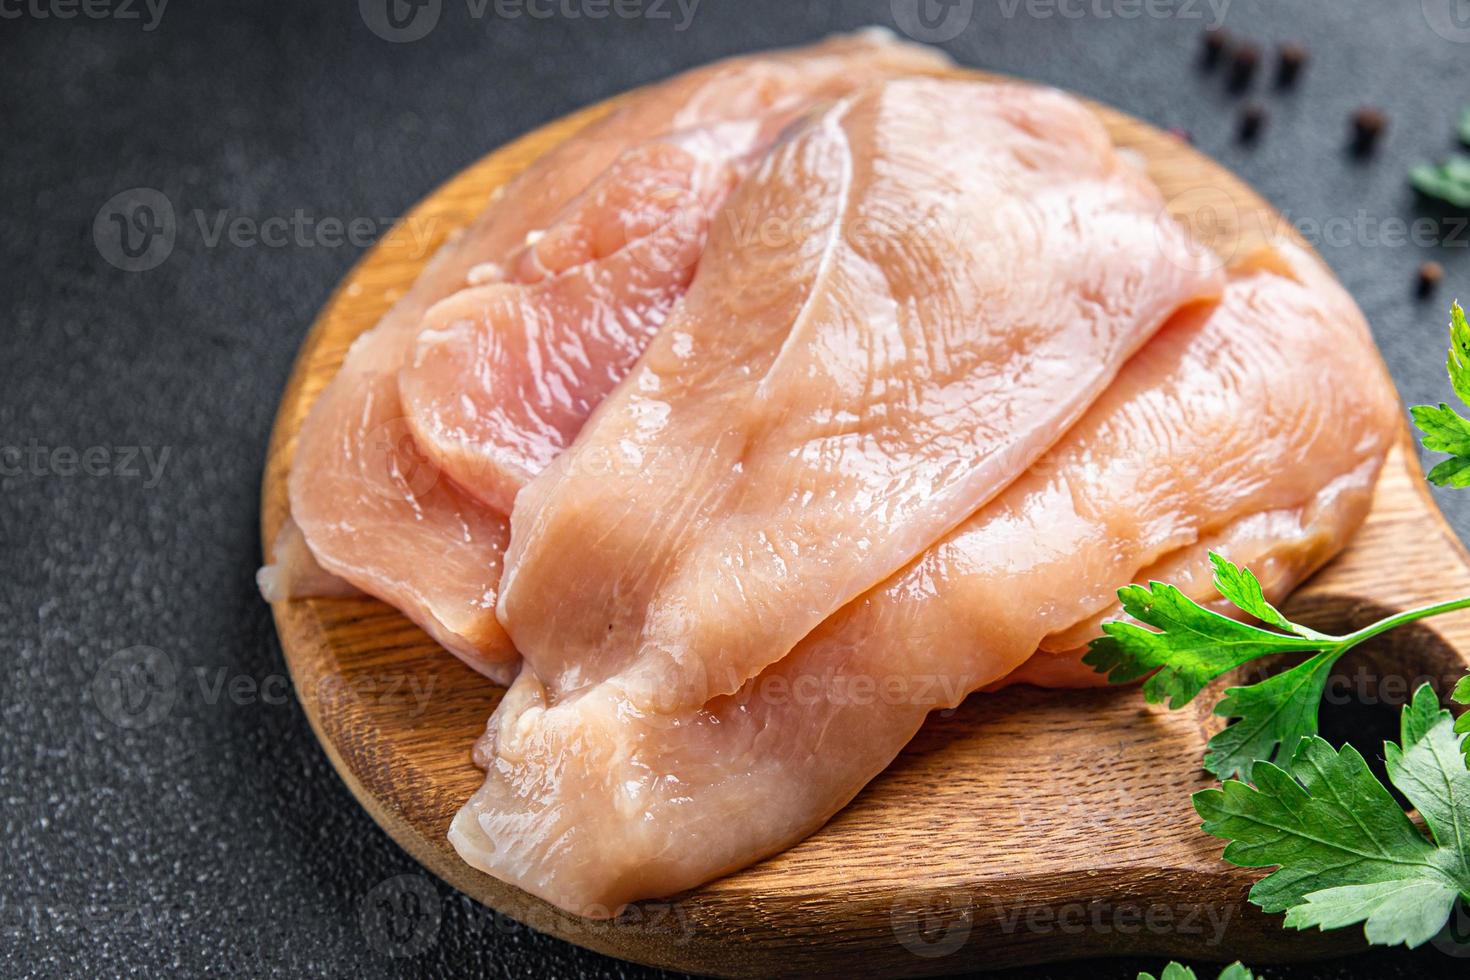 chicken breast slices fresh meat poultry food background photo